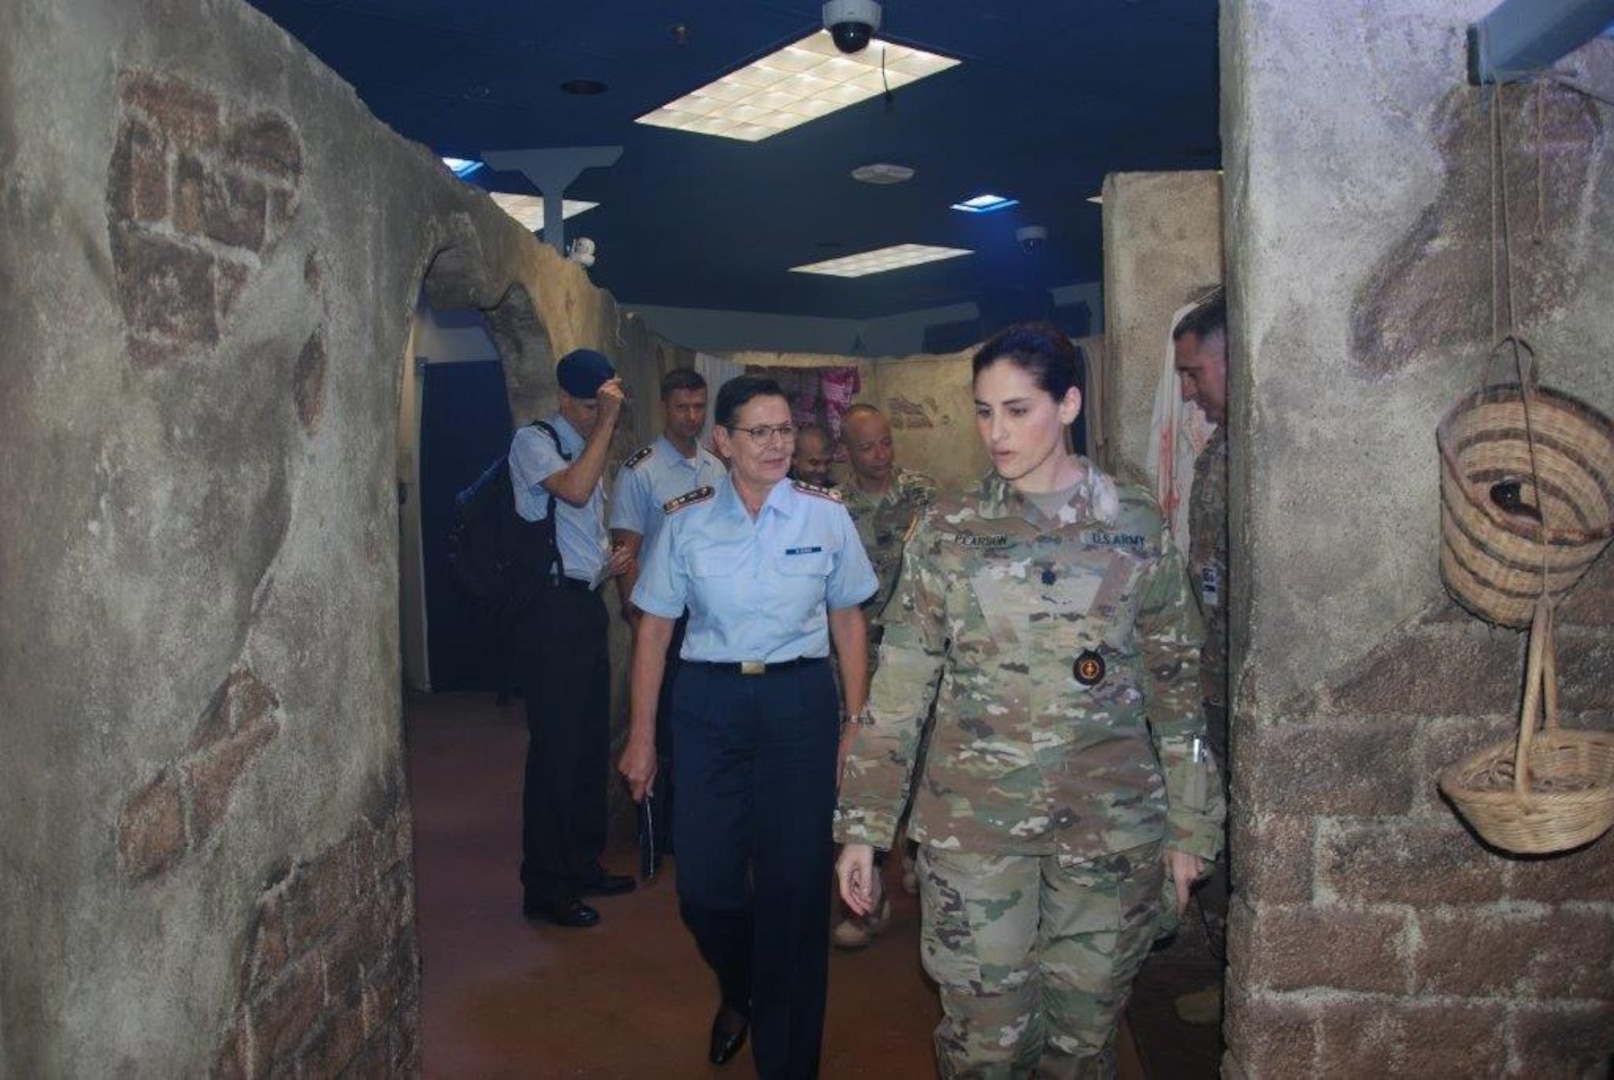 Lt. Col. Nadia Pearson (right), department chair, Combat Medic Training, Health Readiness Center of Excellence, guides Maj. Gen. Gesine Krüger (center), commander, German Bundeswehr Medical Academy, of combat medic simulated trauma scenario training during a visit to the Medical Education and Training Complex, on June 5, 2019. Krüger and a delegation of German medical professionals visited HRCoE to further strengthen the bonds and interoperability programs between our two nations.